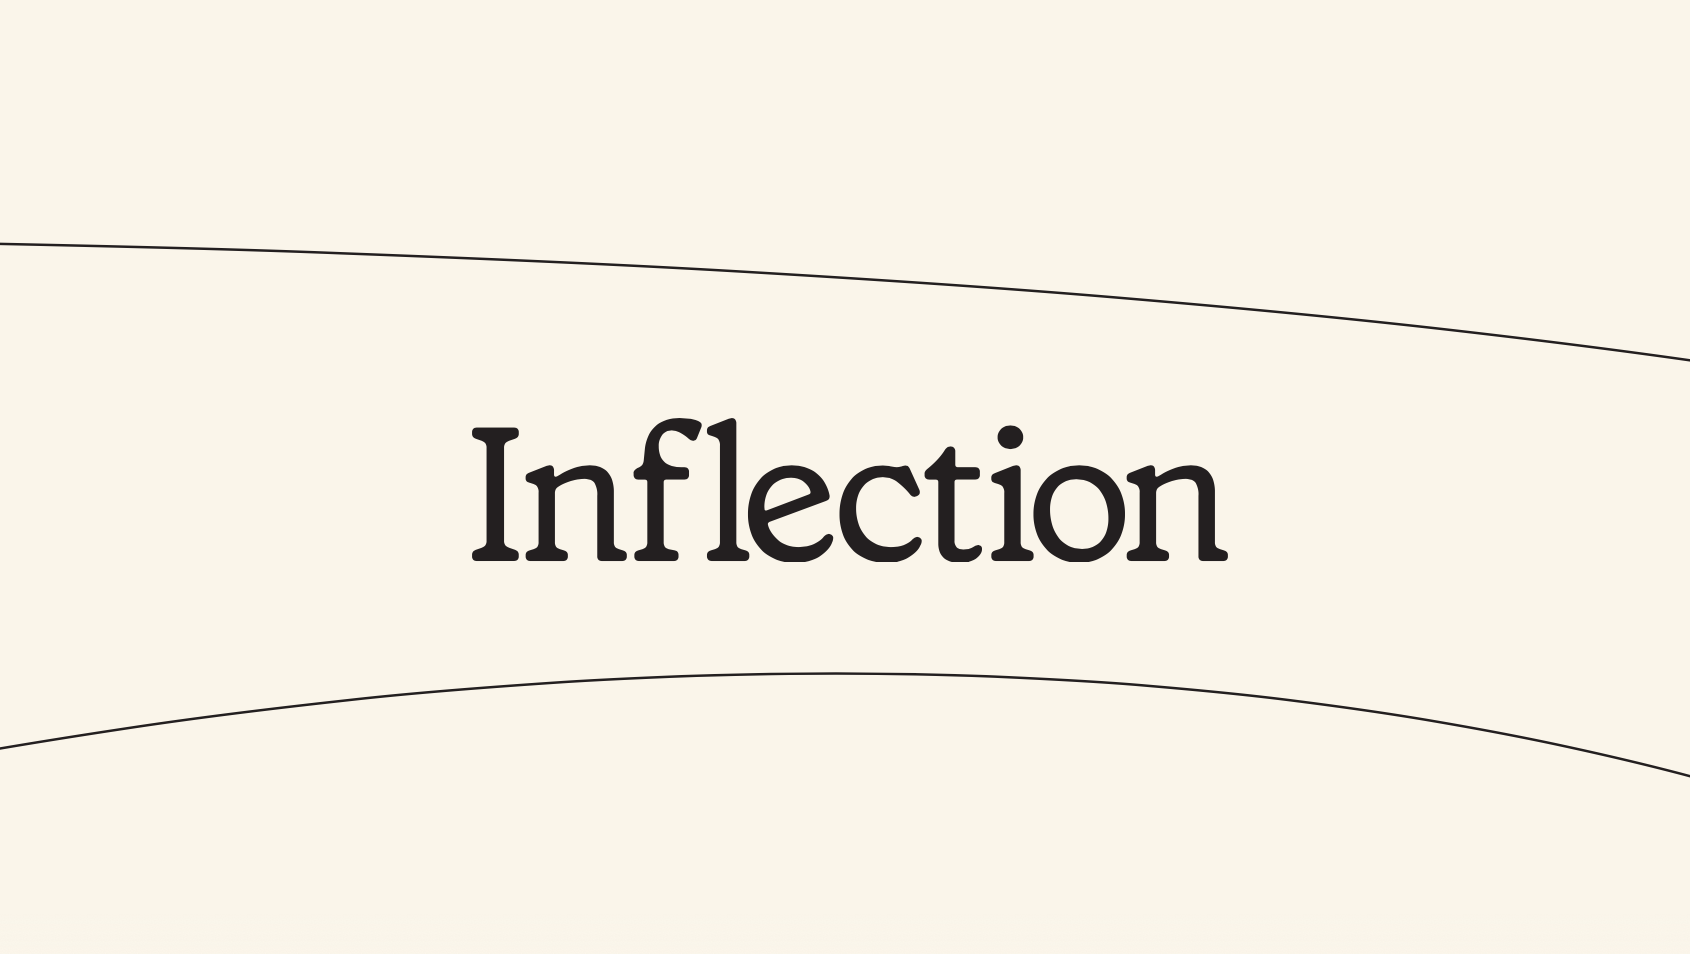 Interview with Inflection AI CEO, Mustafa Suleyman